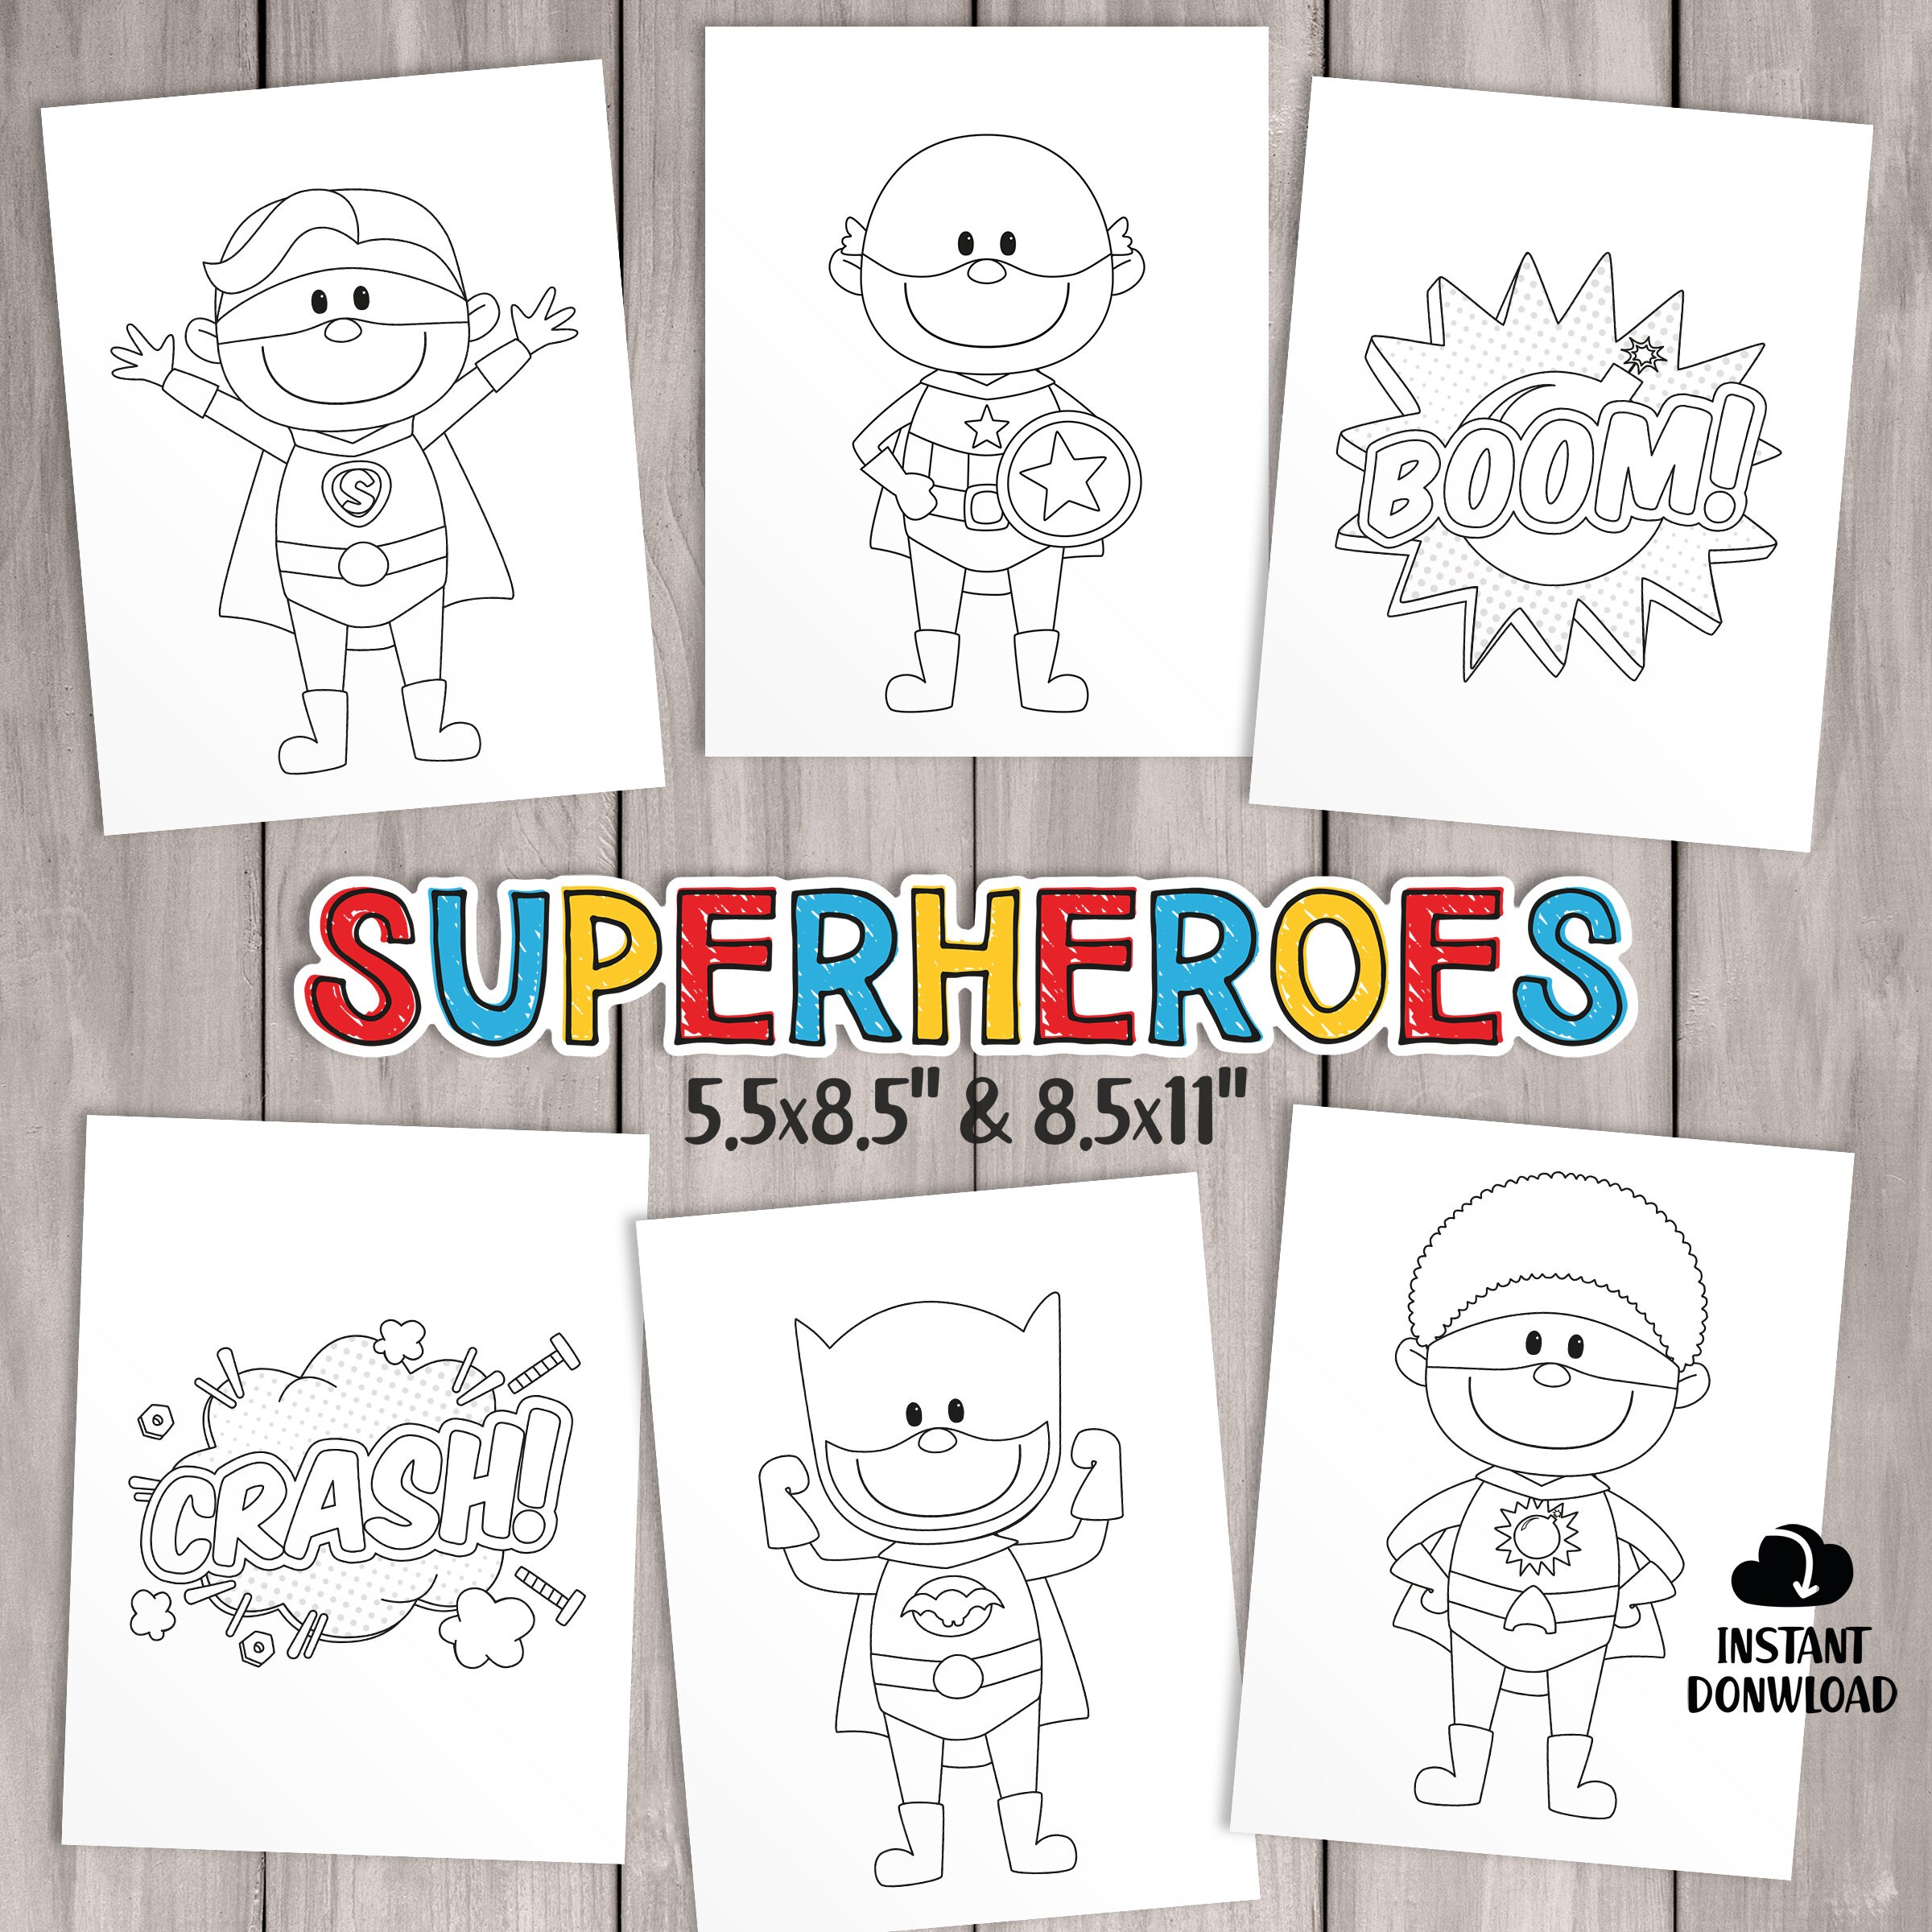 Printable superhero coloring pages kids party games birthday favor coloring sheet baby shower activities school class teacher games download now